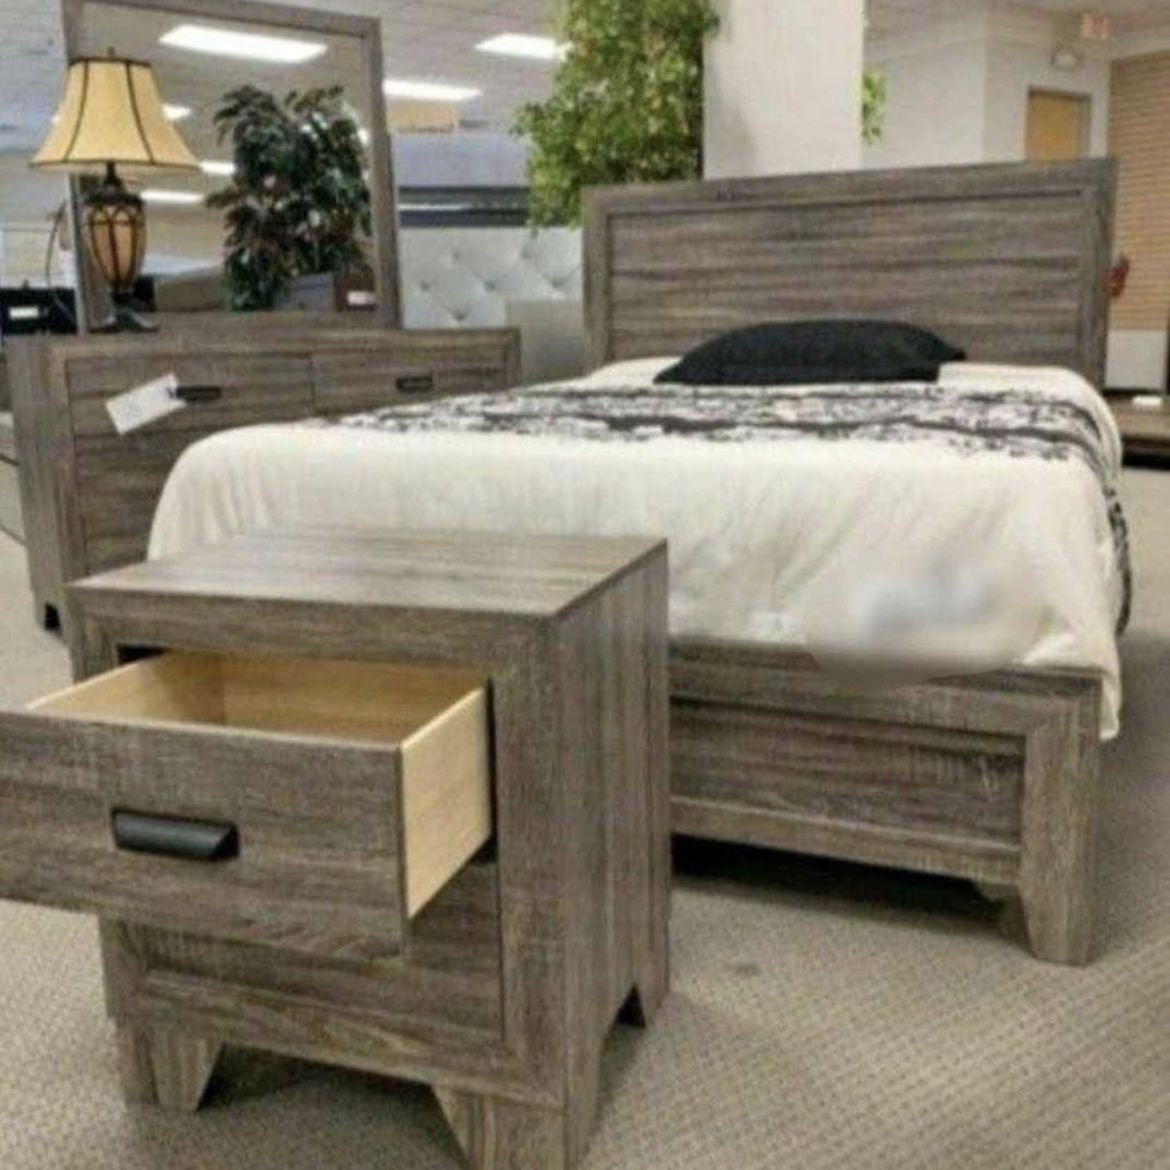 🇺🇸 NEW!! Quitting Business Sale 4pc Bedroom Sets QUEEN KING FULL TWIN STILL IN BOX!📦😴 🚚Delivery